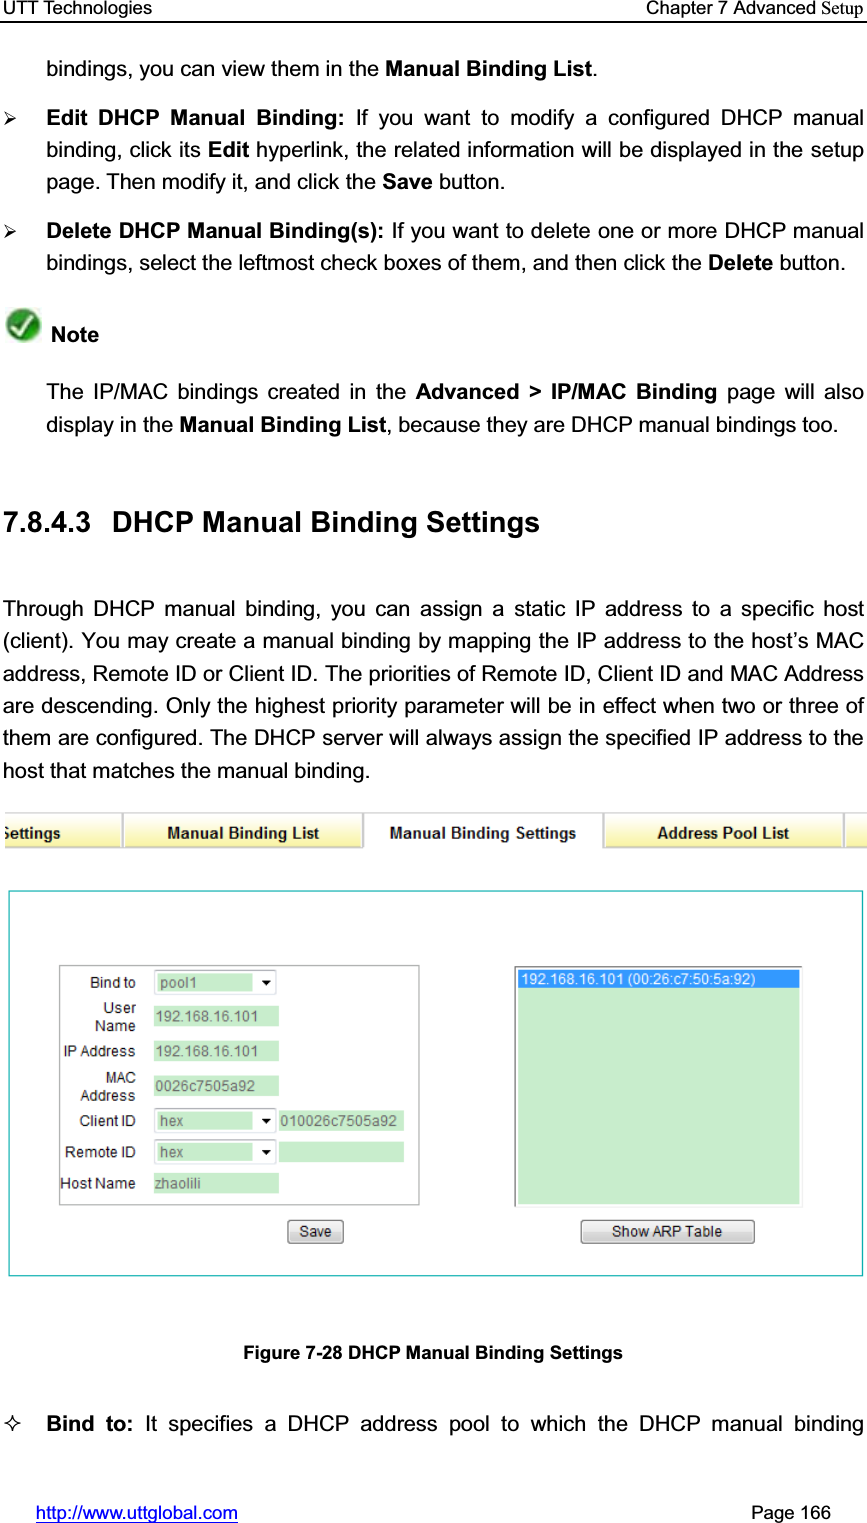 UTT Technologies    Chapter 7 Advanced Setuphttp://www.uttglobal.com                                                       Page 166 bindings, you can view them in the Manual Binding List.¾Edit DHCP Manual Binding: If you want to modify a configured DHCP manual binding, click its Edit hyperlink, the related information will be displayed in the setup page. Then modify it, and click the Save button.¾Delete DHCP Manual Binding(s): If you want to delete one or more DHCP manual bindings, select the leftmost check boxes of them, and then click the Delete button. NoteThe IP/MAC bindings created in the Advanced &gt; IP/MAC Binding page will also   display in the Manual Binding List, because they are DHCP manual bindings too.7.8.4.3  DHCP Manual Binding Settings Through DHCP manual binding, you can assign a static IP address to a specific host (client). You may create a manual binding by mapping the IP address to the host¶s MAC address, Remote ID or Client ID. The priorities of Remote ID, Client ID and MAC Address are descending. Only the highest priority parameter will be in effect when two or three of them are configured. The DHCP server will always assign the specified IP address to the host that matches the manual binding. Figure 7-28 DHCP Manual Binding Settings Bind to: It specifies a DHCP address pool to which the DHCP manual binding 